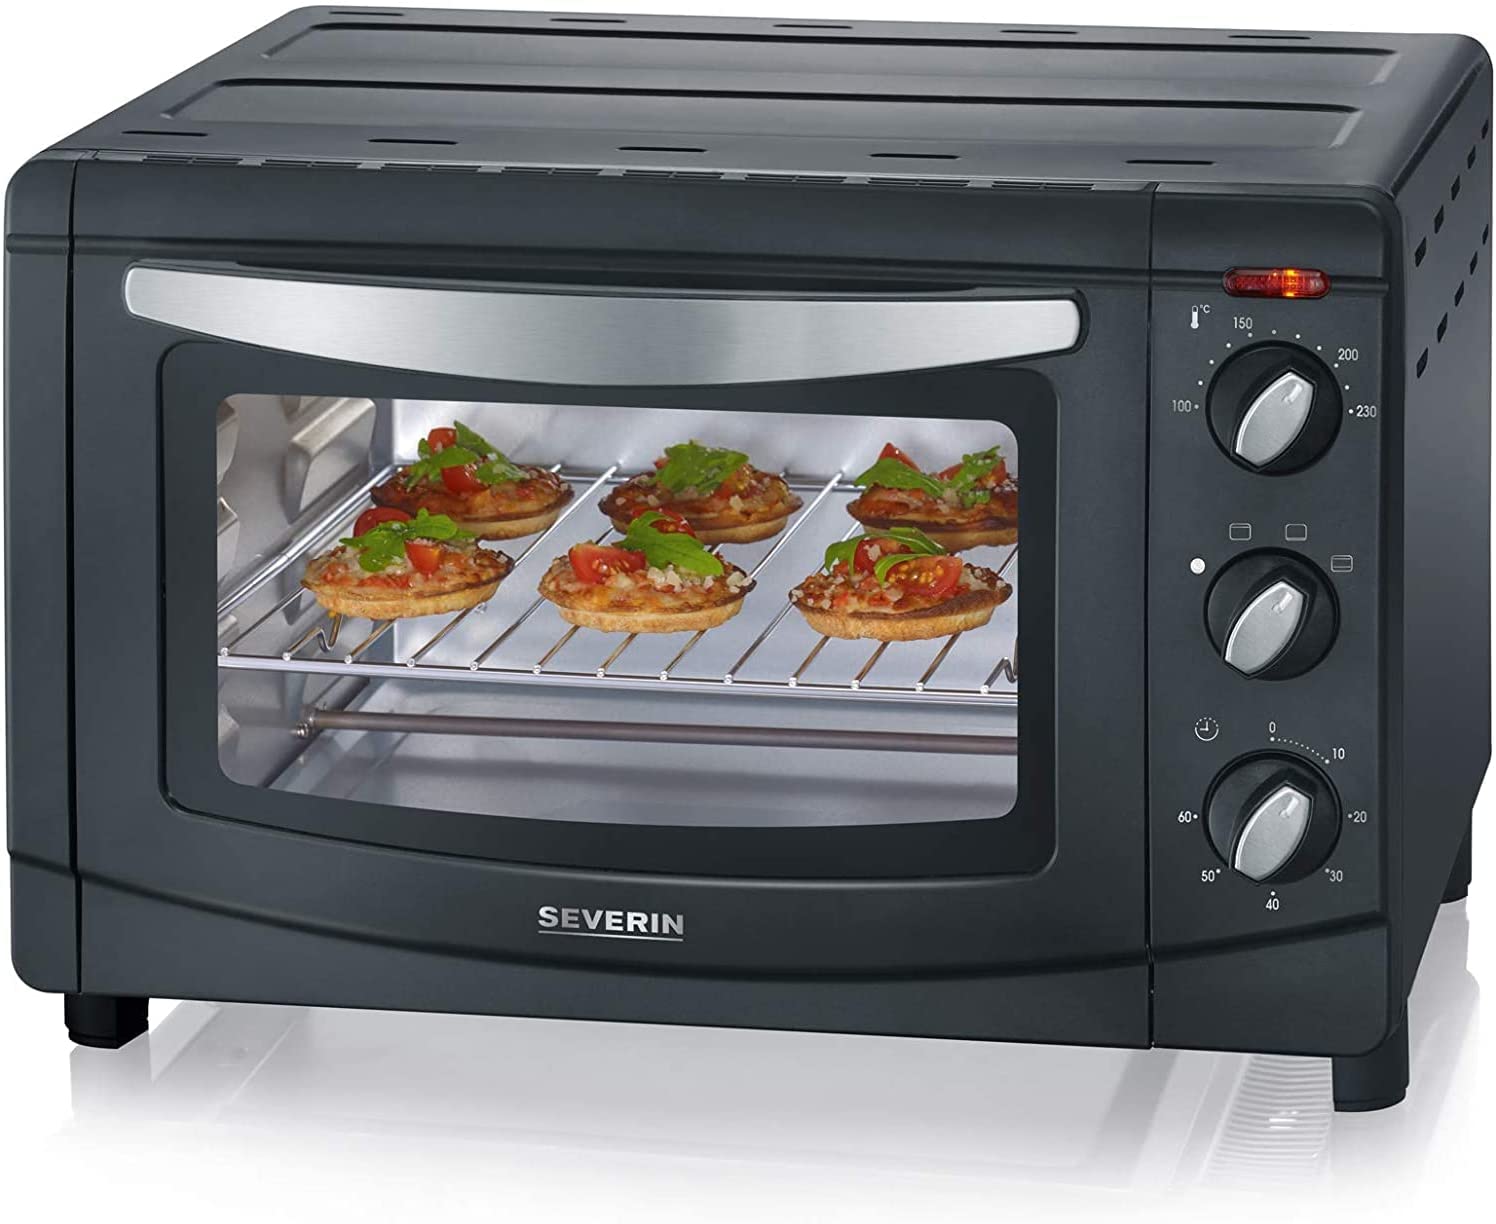 SEVERIN TO 9560 Baking and Toast Oven 1,500 W with Pizza Stone Grill and Baking Tray 20 L Silver / Black